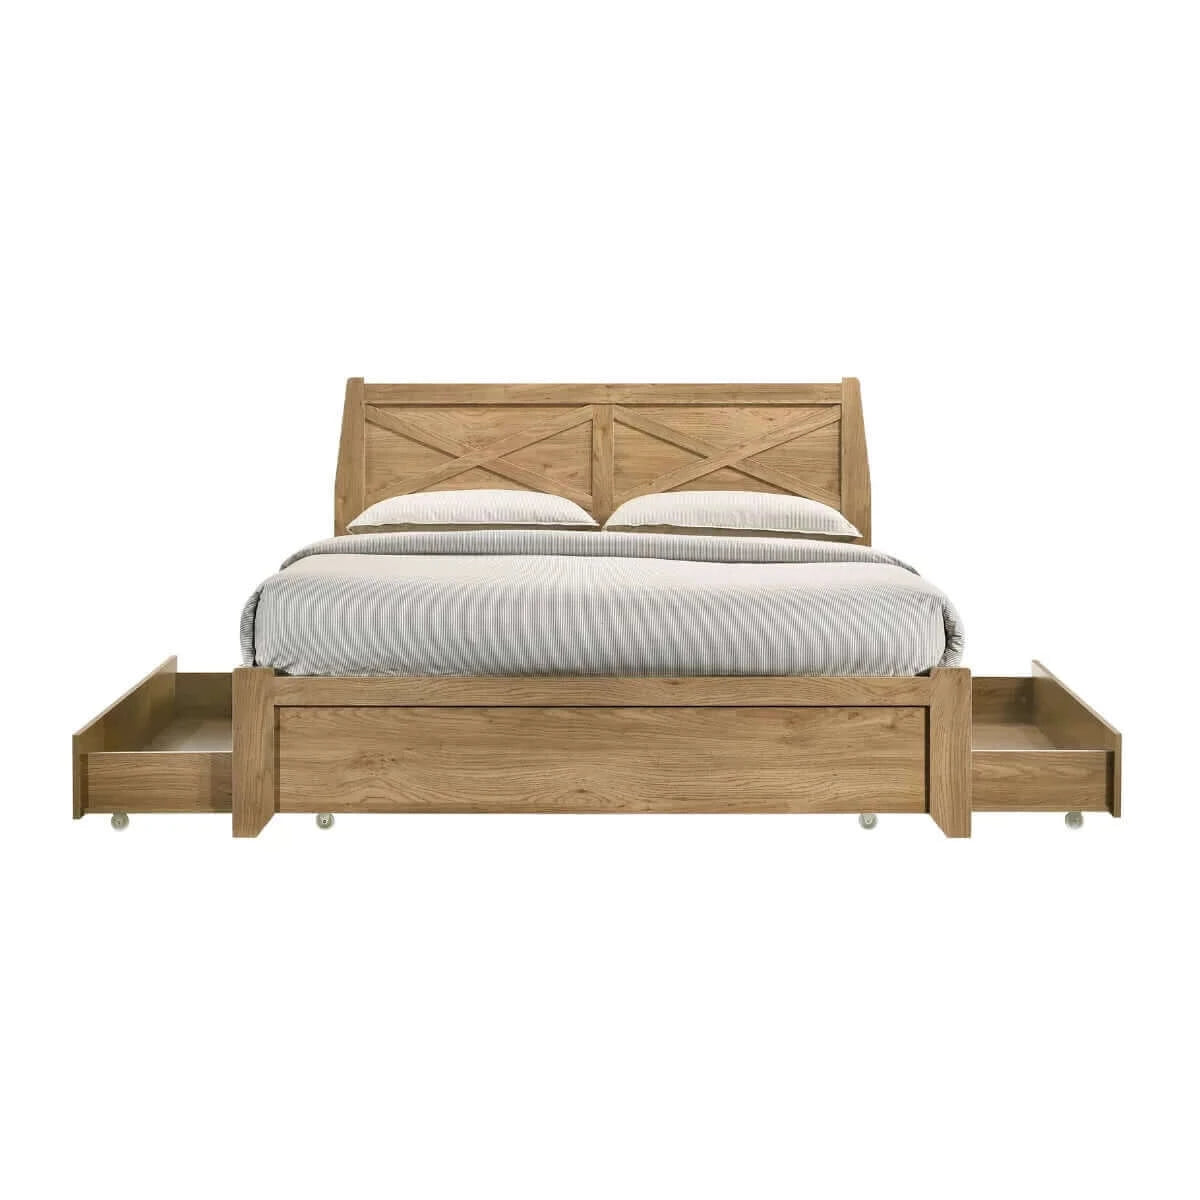 Buy mica natural wooden bed frame with storage drawers queen - upinteriors-Upinteriors